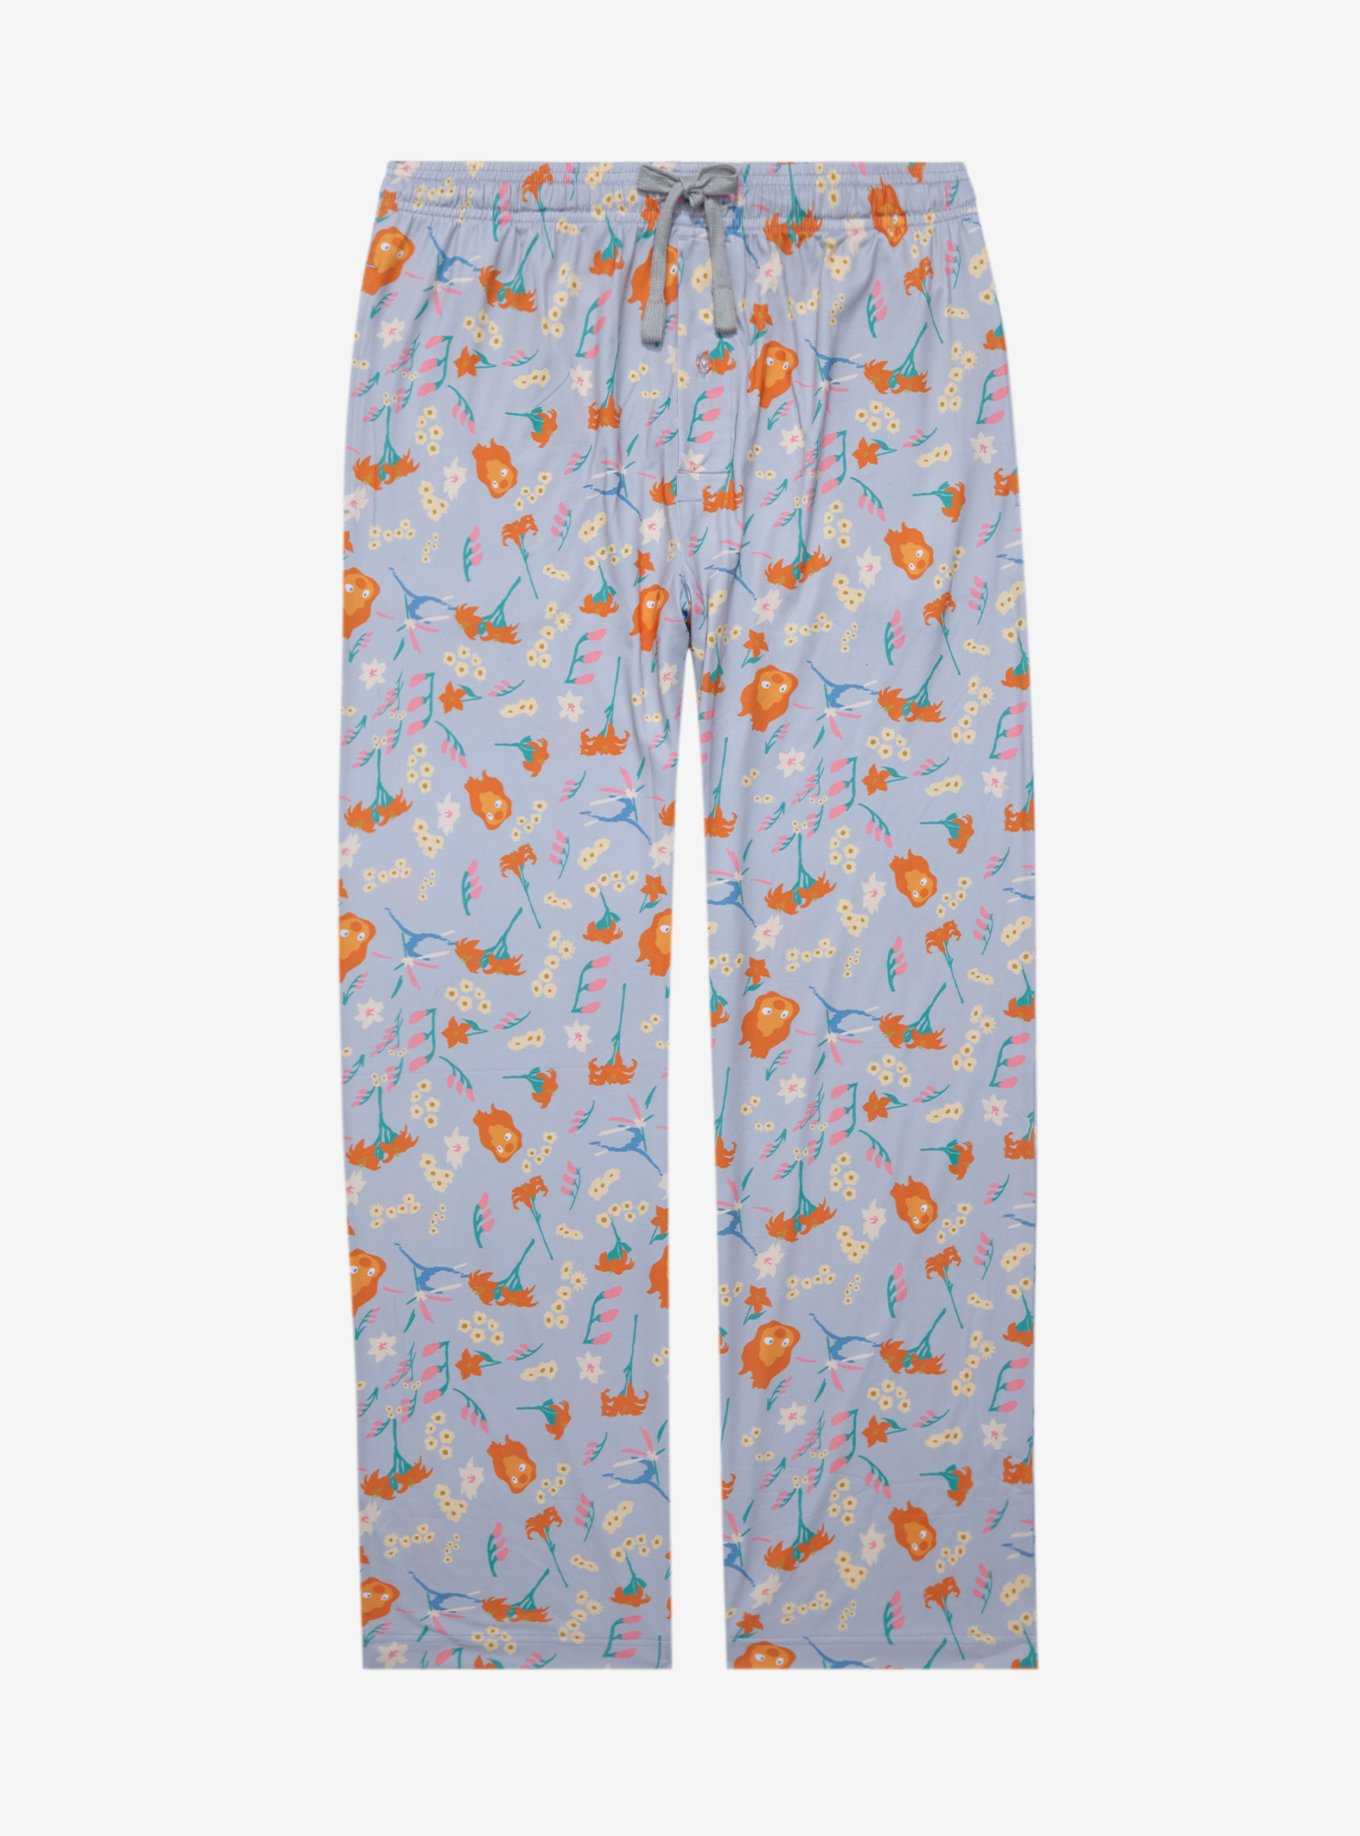 Studio Ghibli Howl’s Moving Castle Calcifer Floral Allover Print Sleep Pants - BoxLunch Exclusive, , hi-res